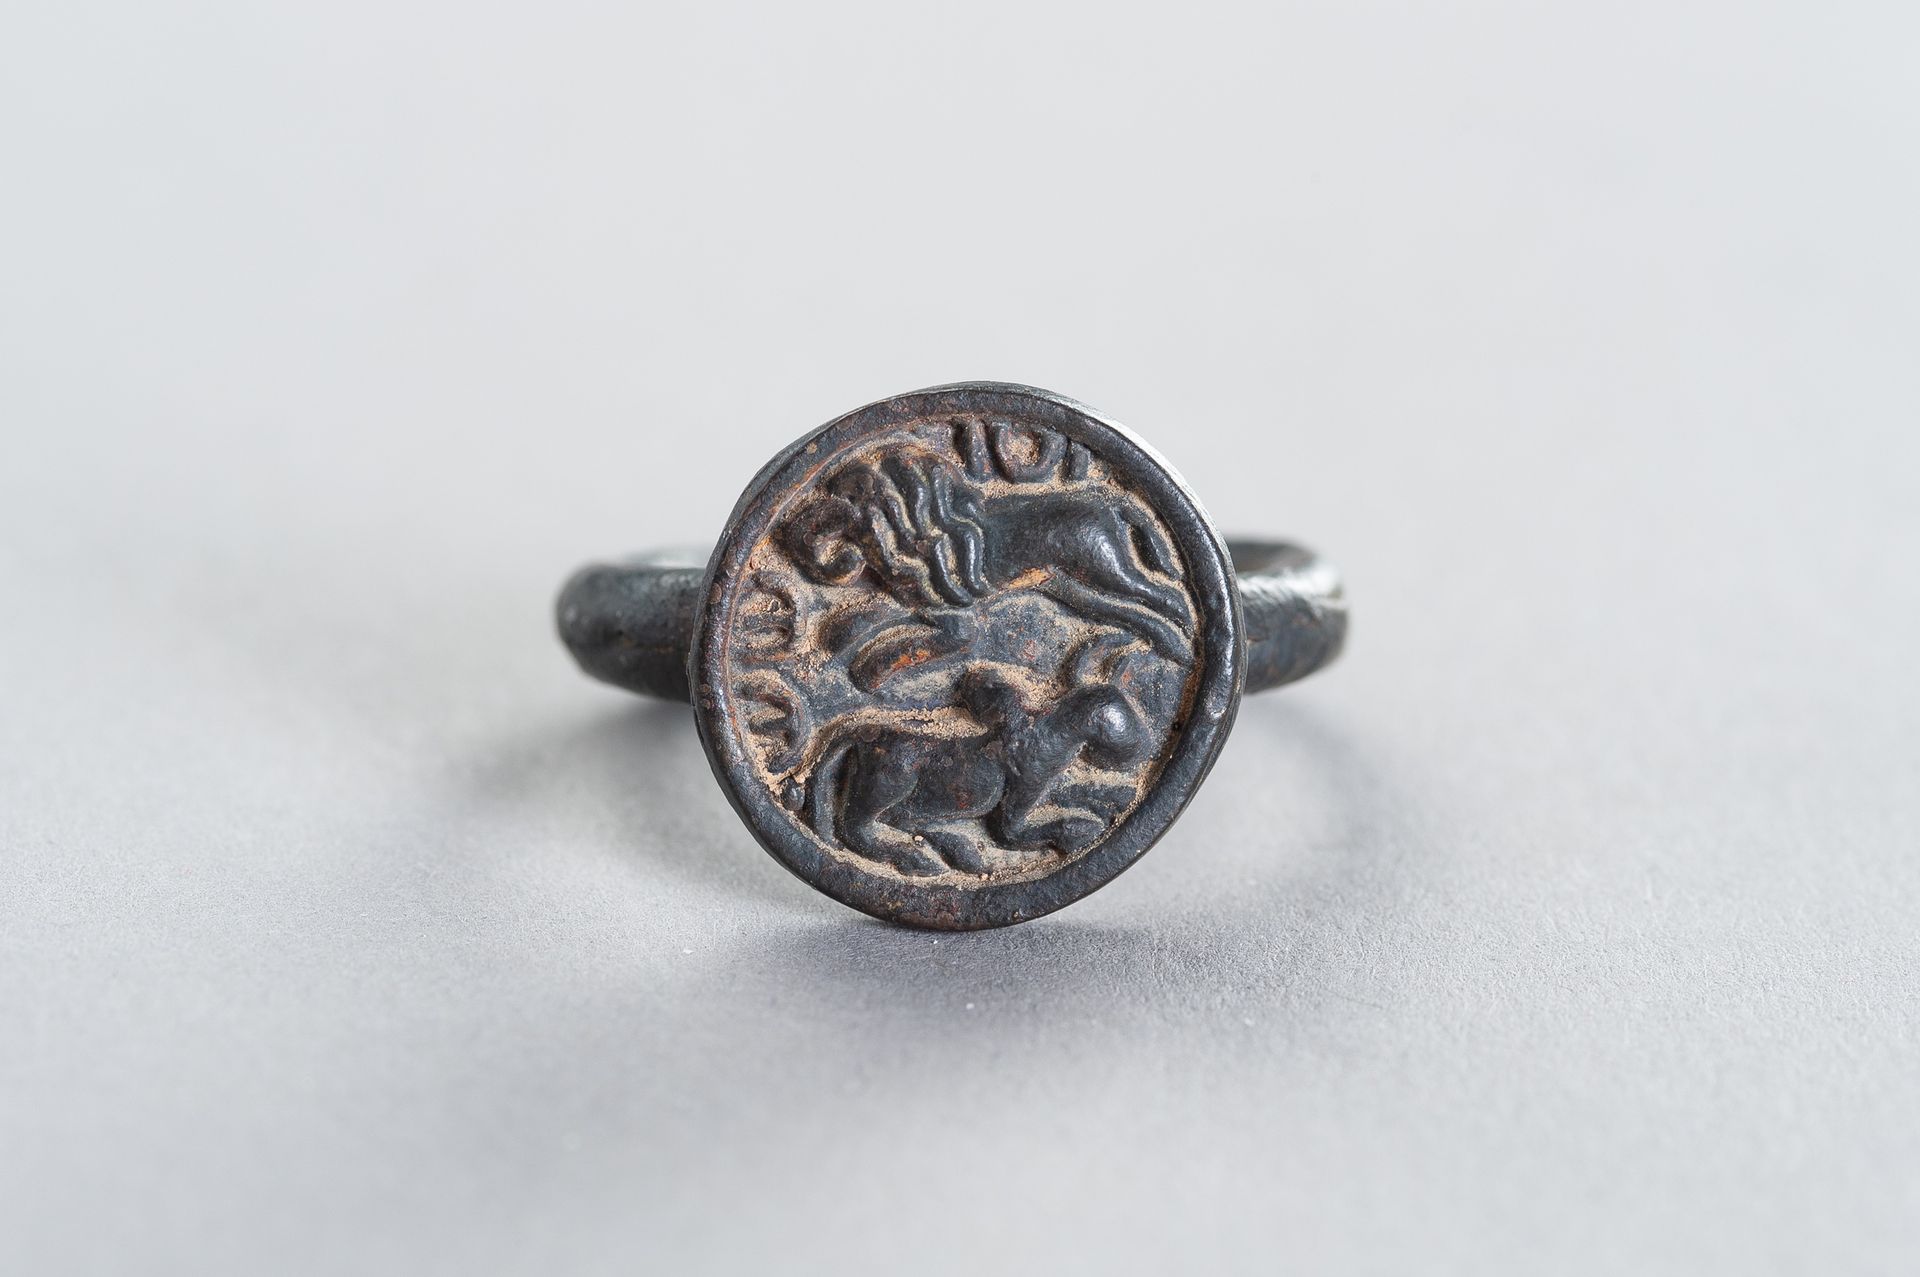 A BRONZE INTAGLIO RING WITH A HUNTING LION A BRONZE INTAGLIO RING WITH A HUNTING&hellip;